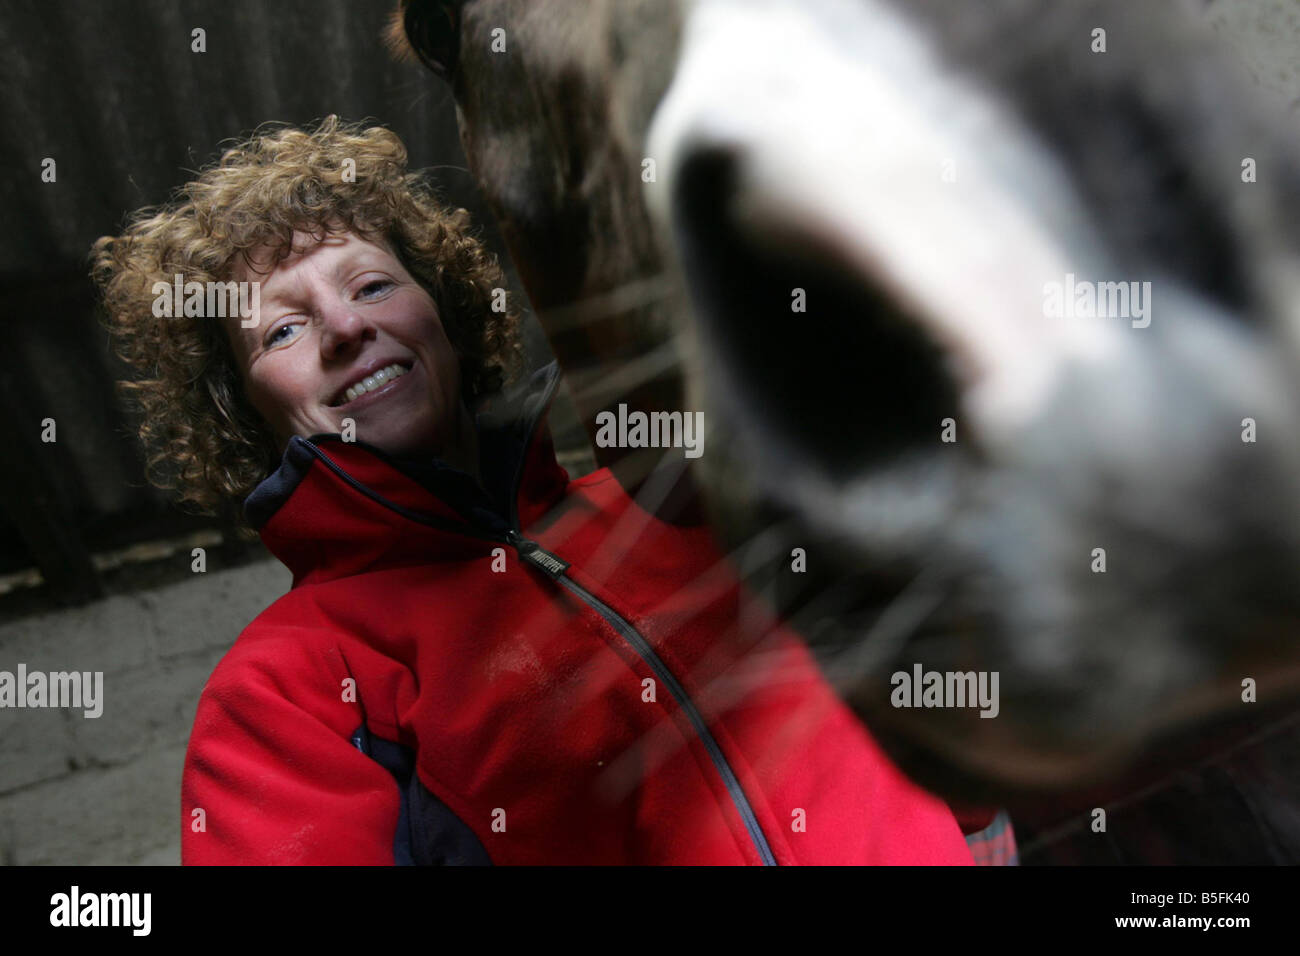 Racehorse Trainer Lucinda Russell with Horse Strong Resolve at their stables near Milnathort in Kinross  Stock Photo